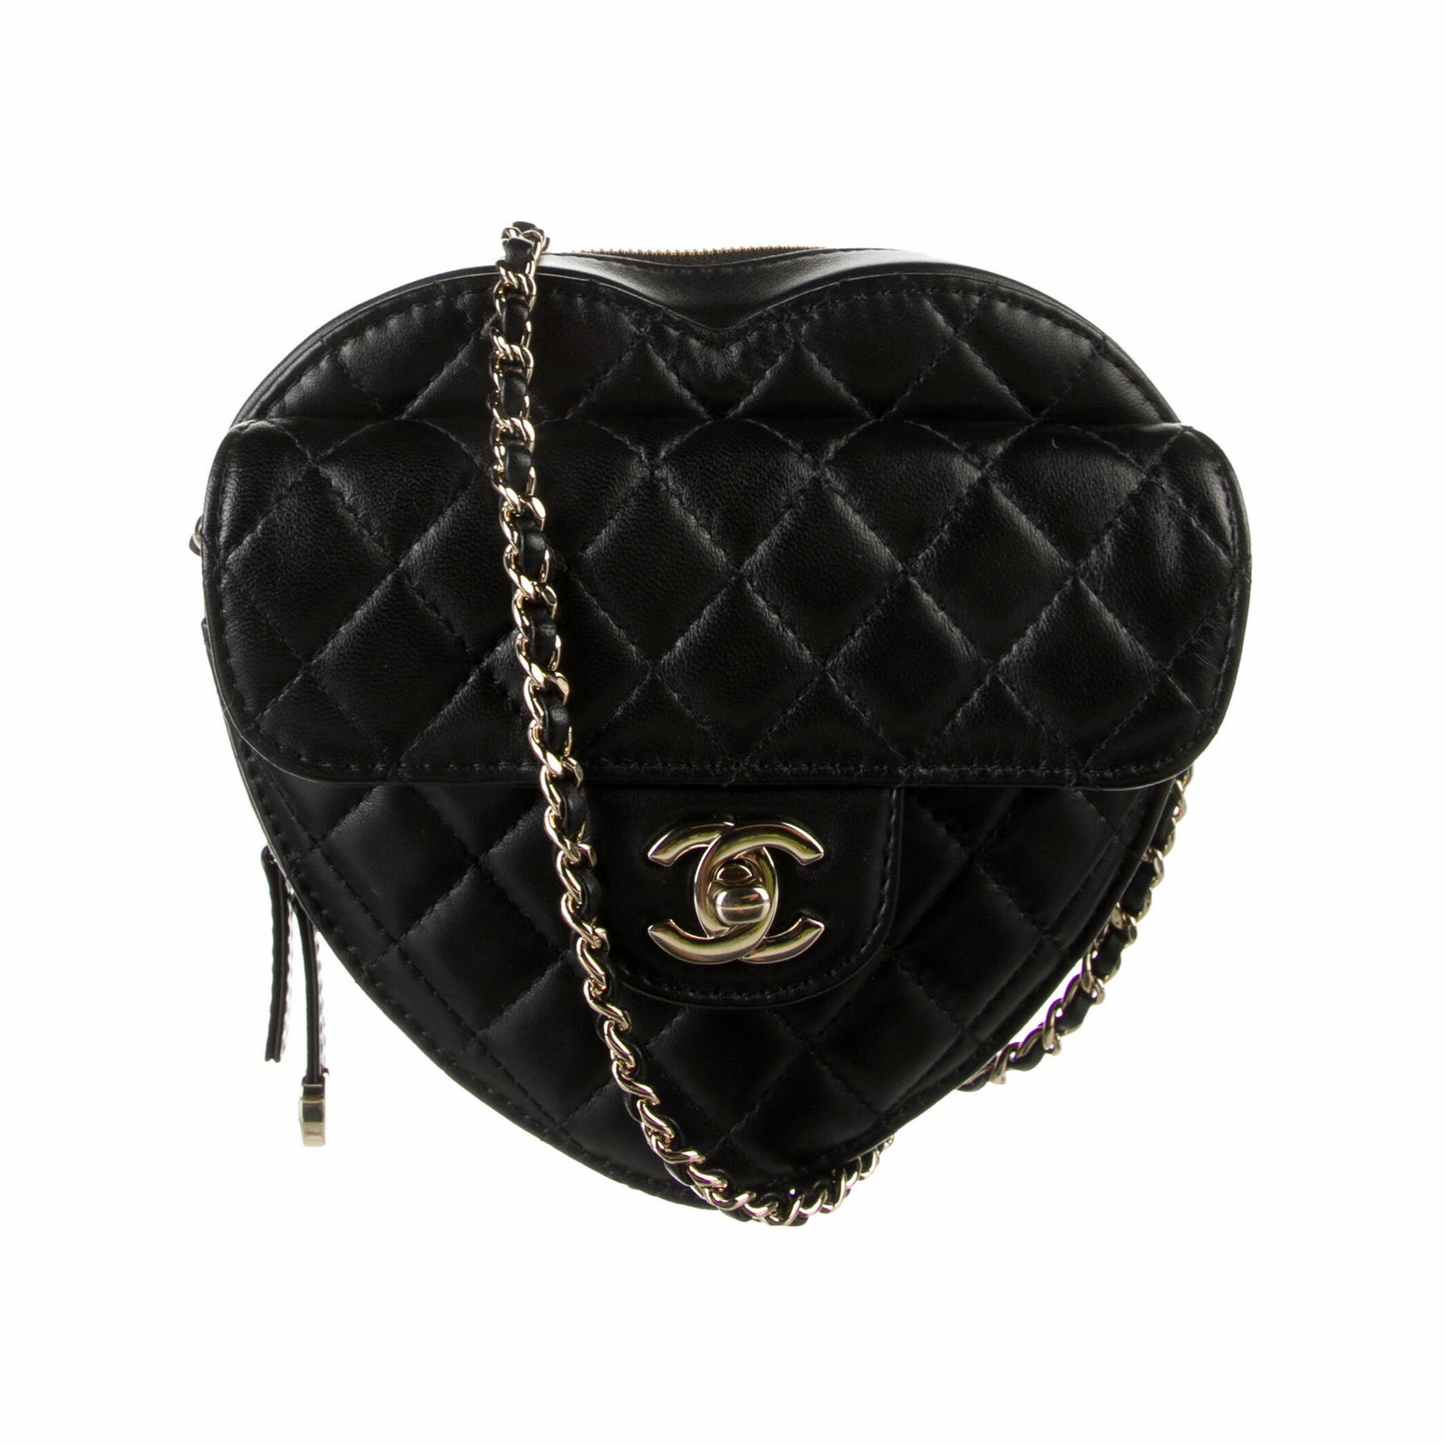 CHANEL Lambskin Quilted CC In Love Heart Bag Pink 1026155